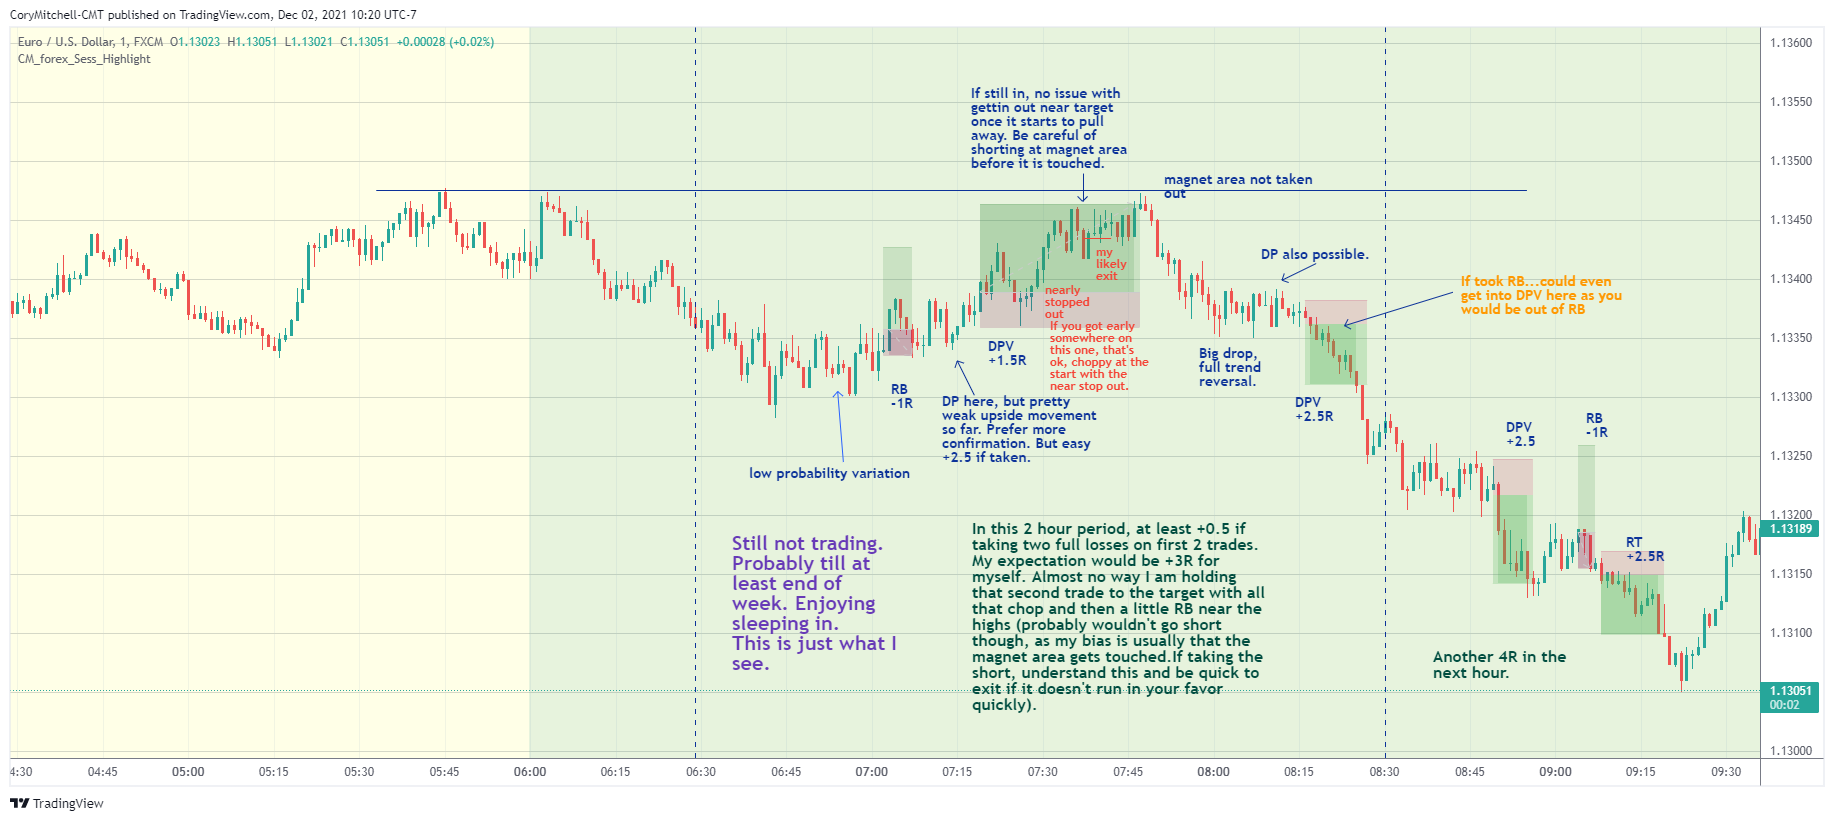 EURUSD day trading examples on 1-minute chart Dec. 2